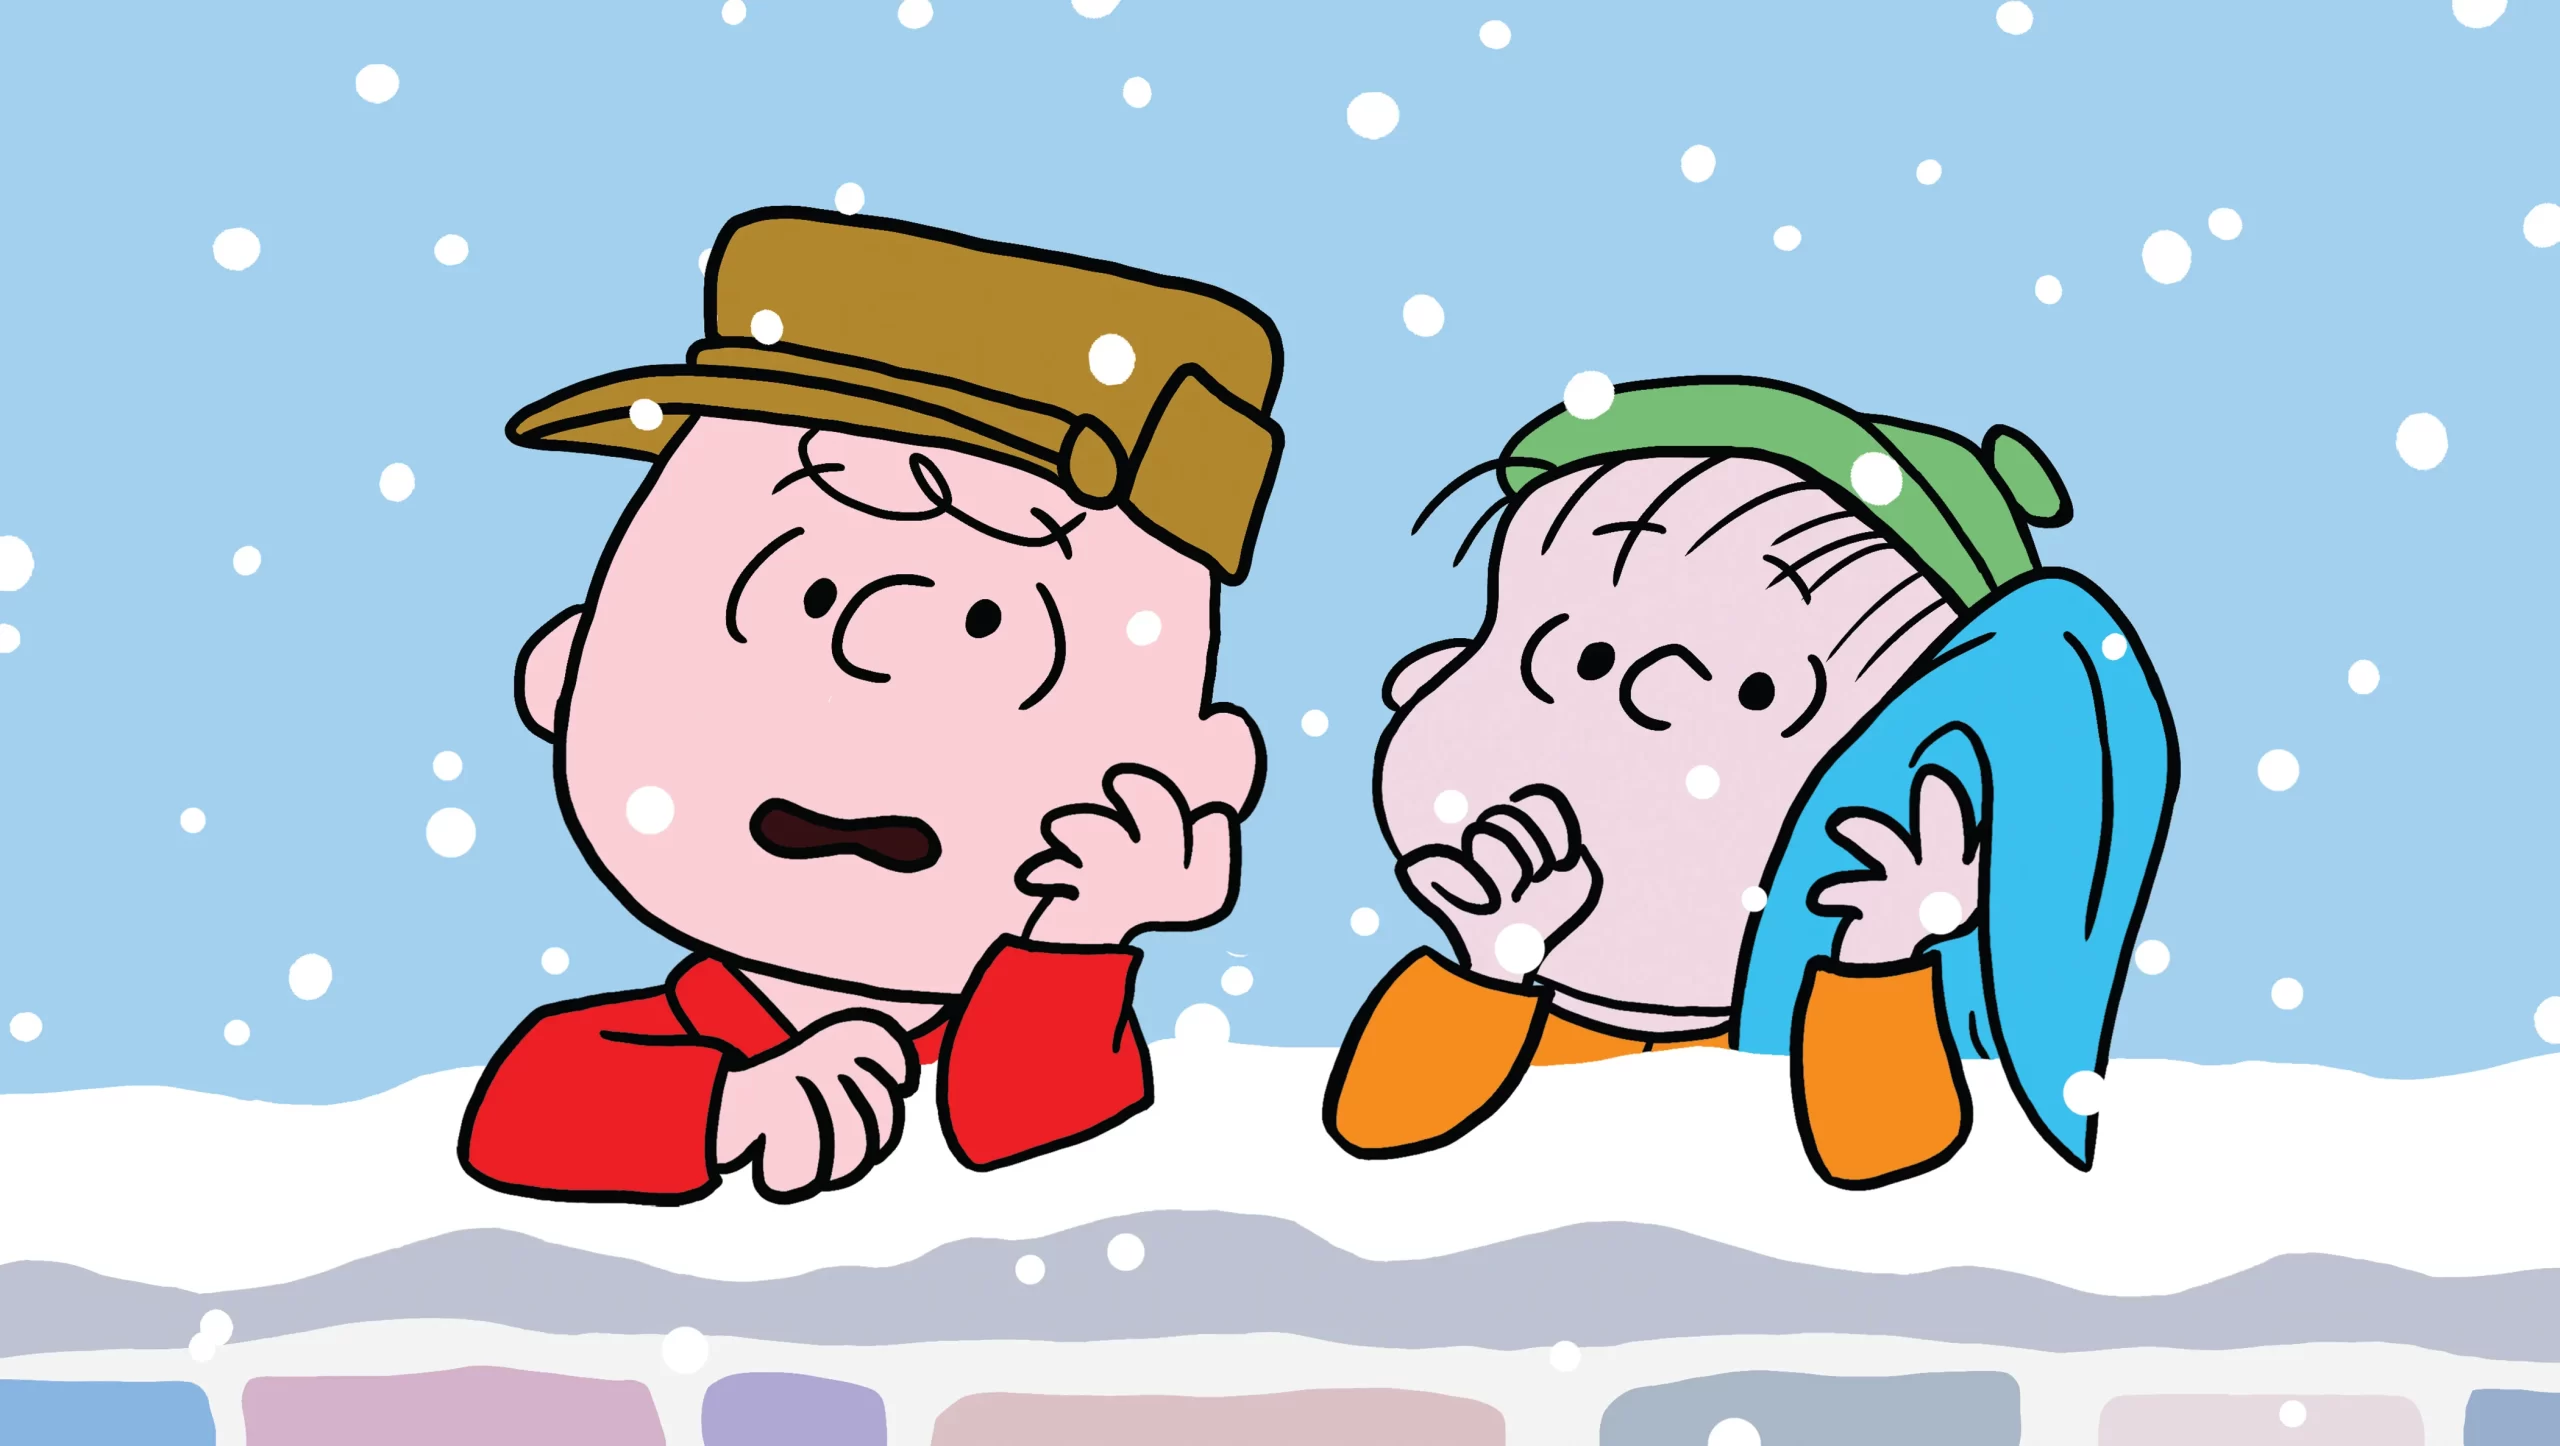 Charlie Brown (Peter Robbins) and Linus (Christopher Shea) lament how Christmas has become commercialized.